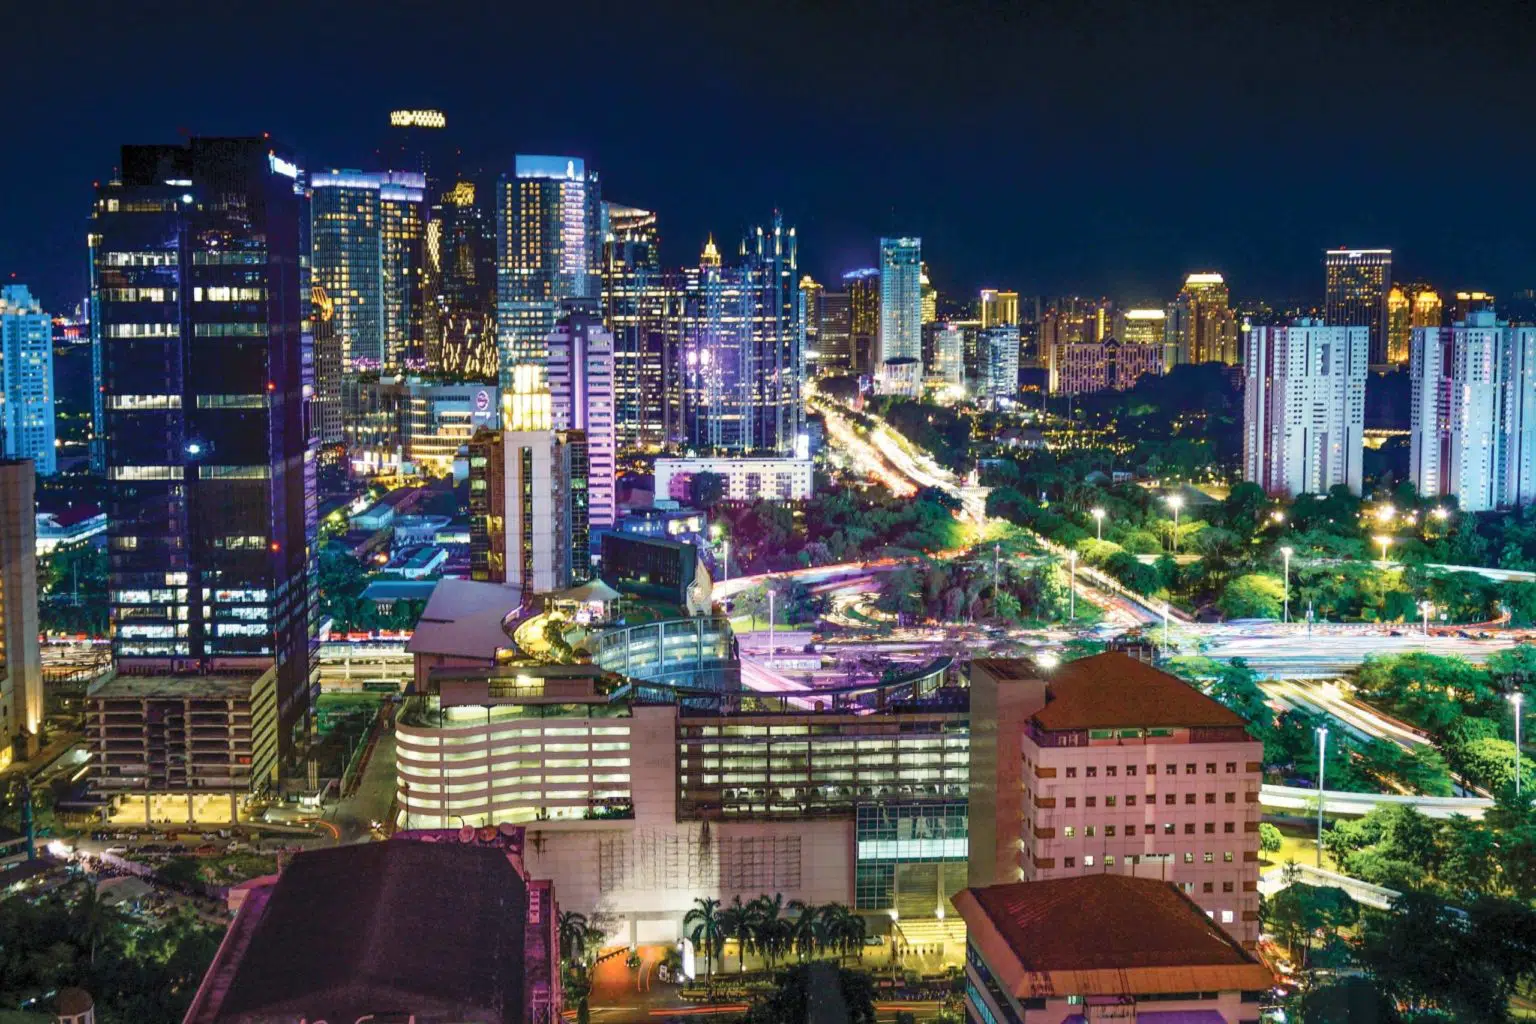 The city of Jakarta, Indonesia flourishes with life at night, demonstrating the grand success of its commercial sector and the advantage the Indonesia eCommerce market provides to the country's economy.